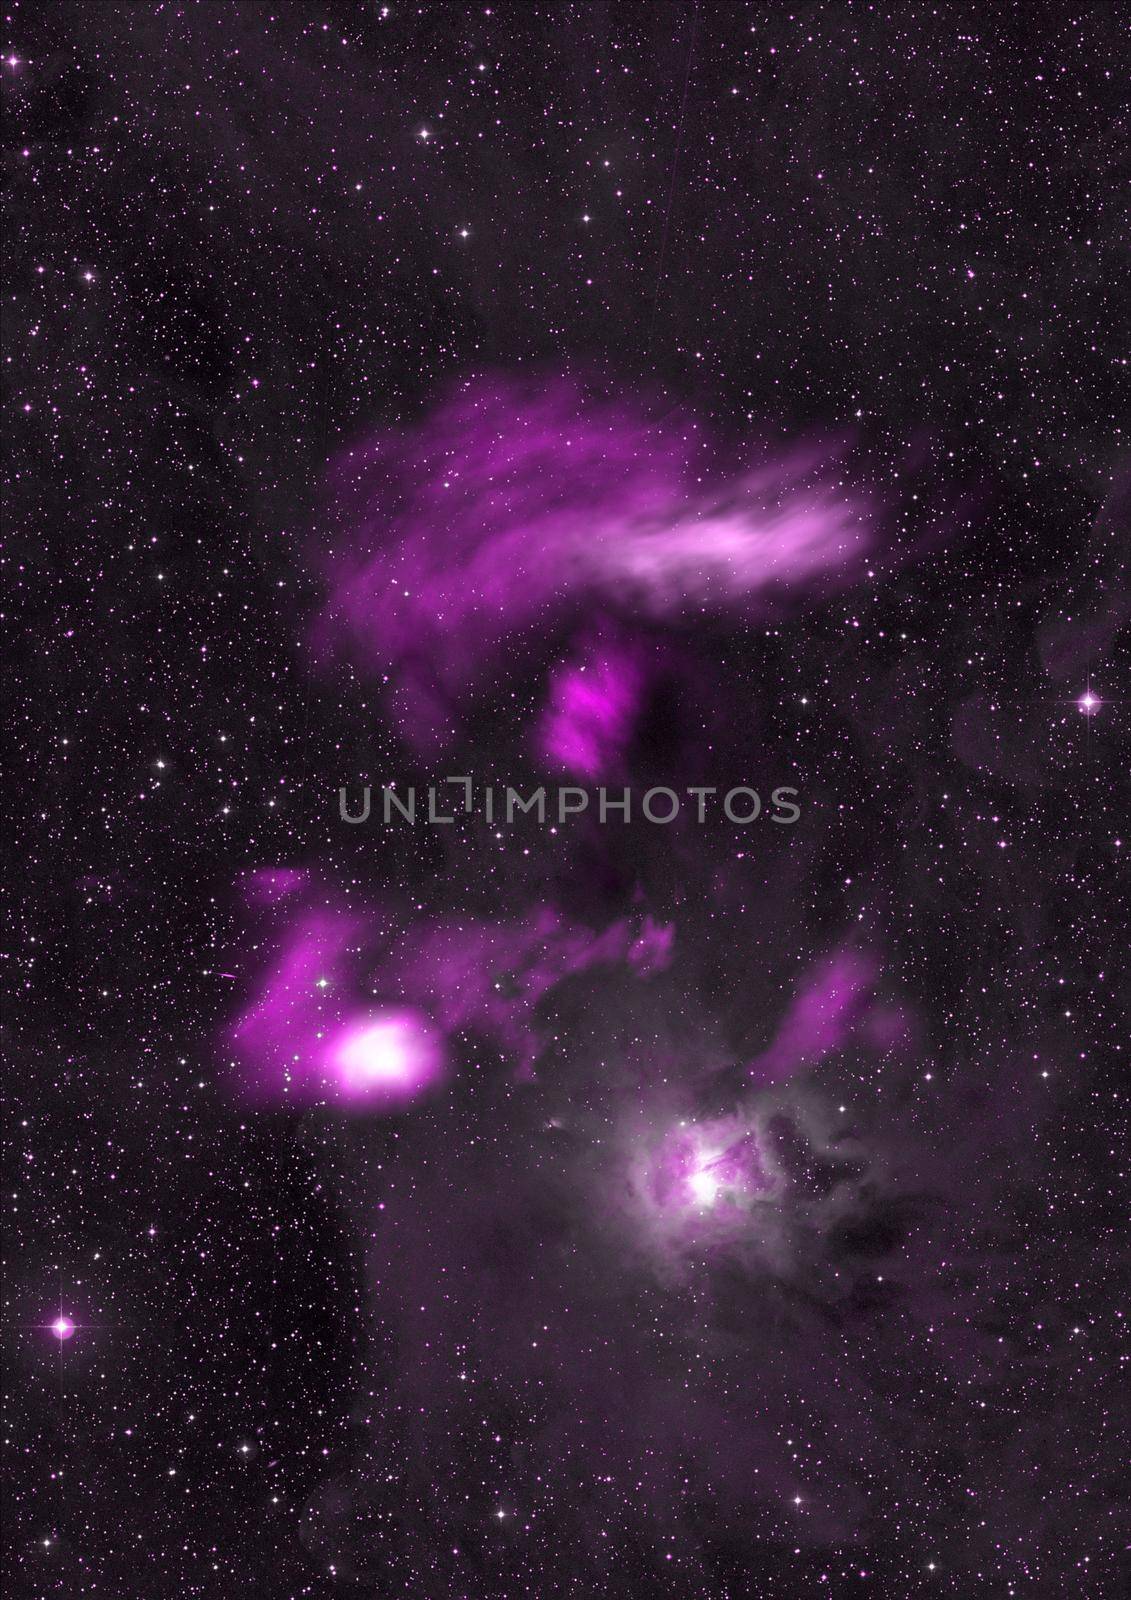 Being shone nebula and star field. 3D rendering by richter1910